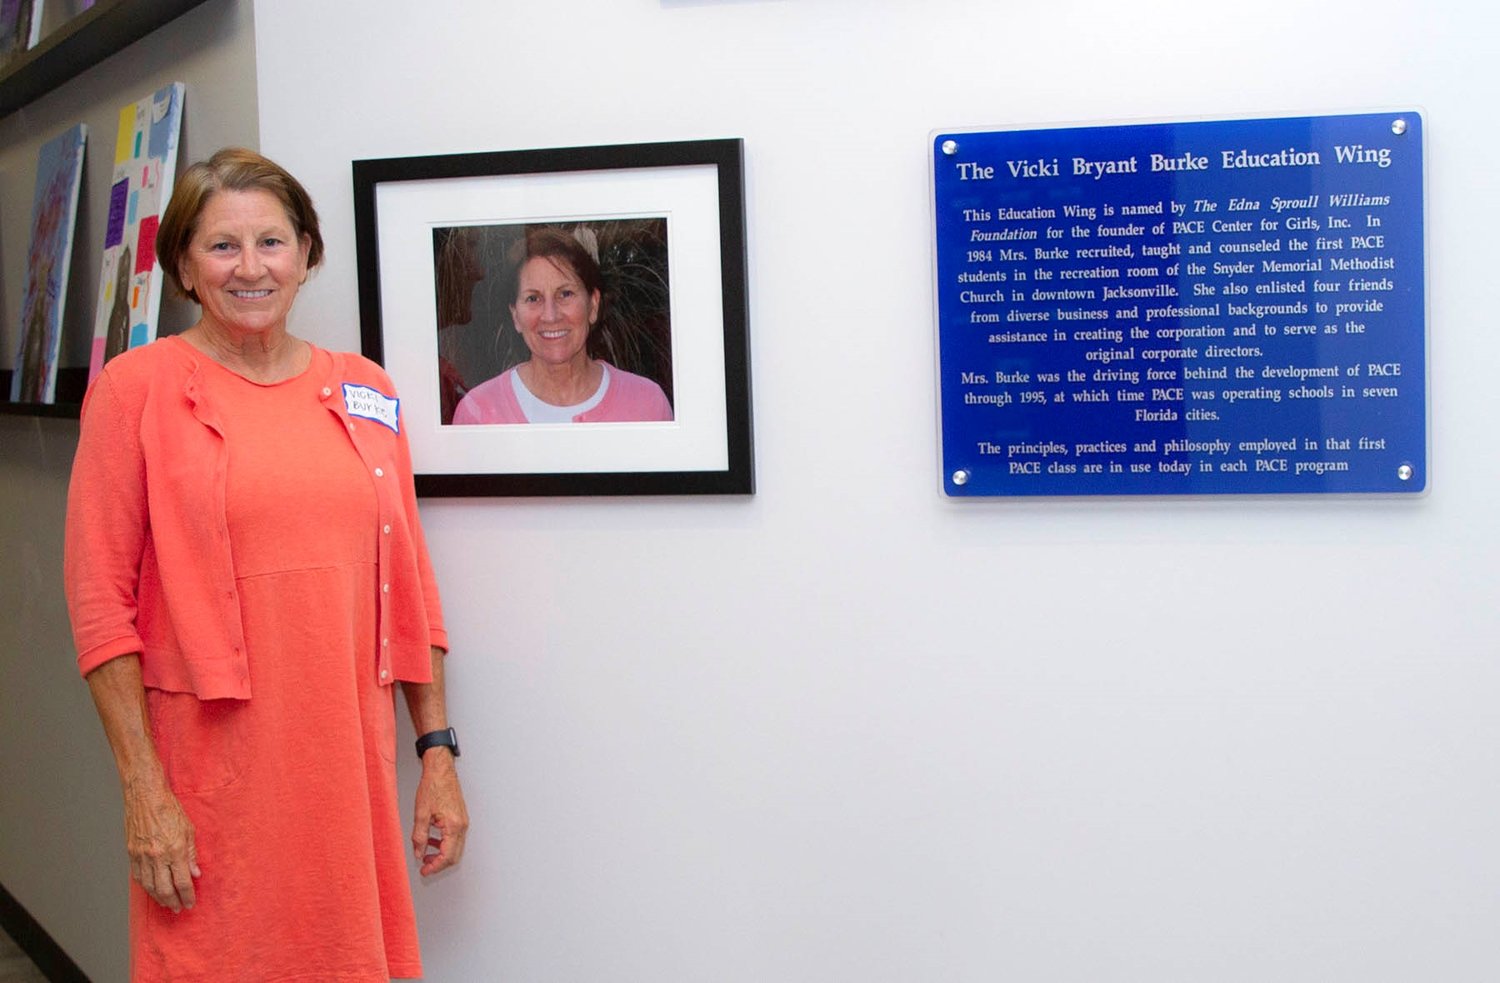 Vicki Burke founded Pace Center for Girls in 1985 with 10 girls at one center in Jacksonville. With more than 40,000 girls served since, Pace is a transformational program that not only empowers girls to reach their highest potential, but shows them that a life of love, success and happiness is possible for them.